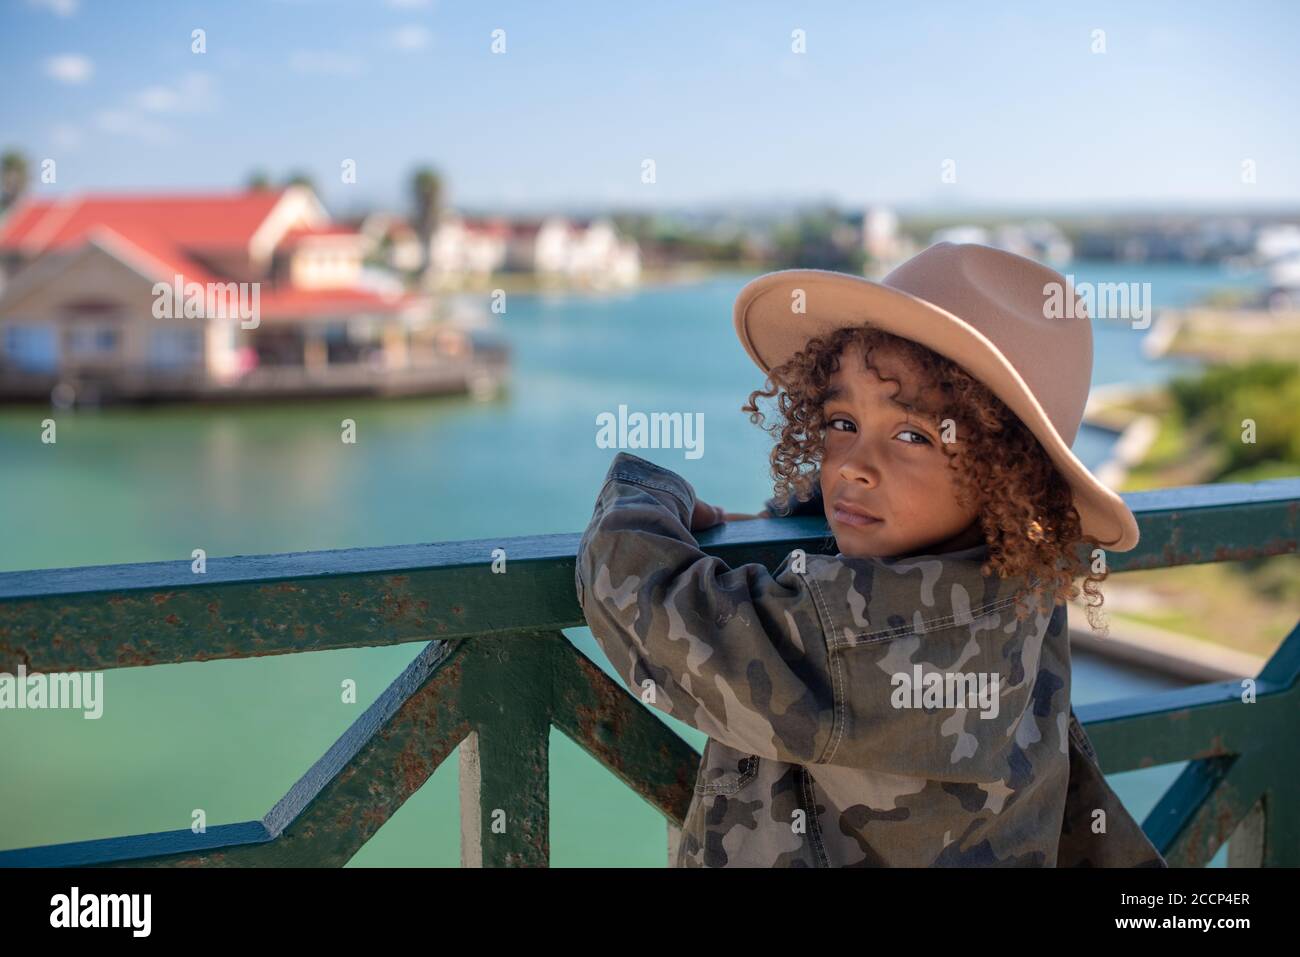 Close up portrait of young boy with hat staring backwards Stock Photo